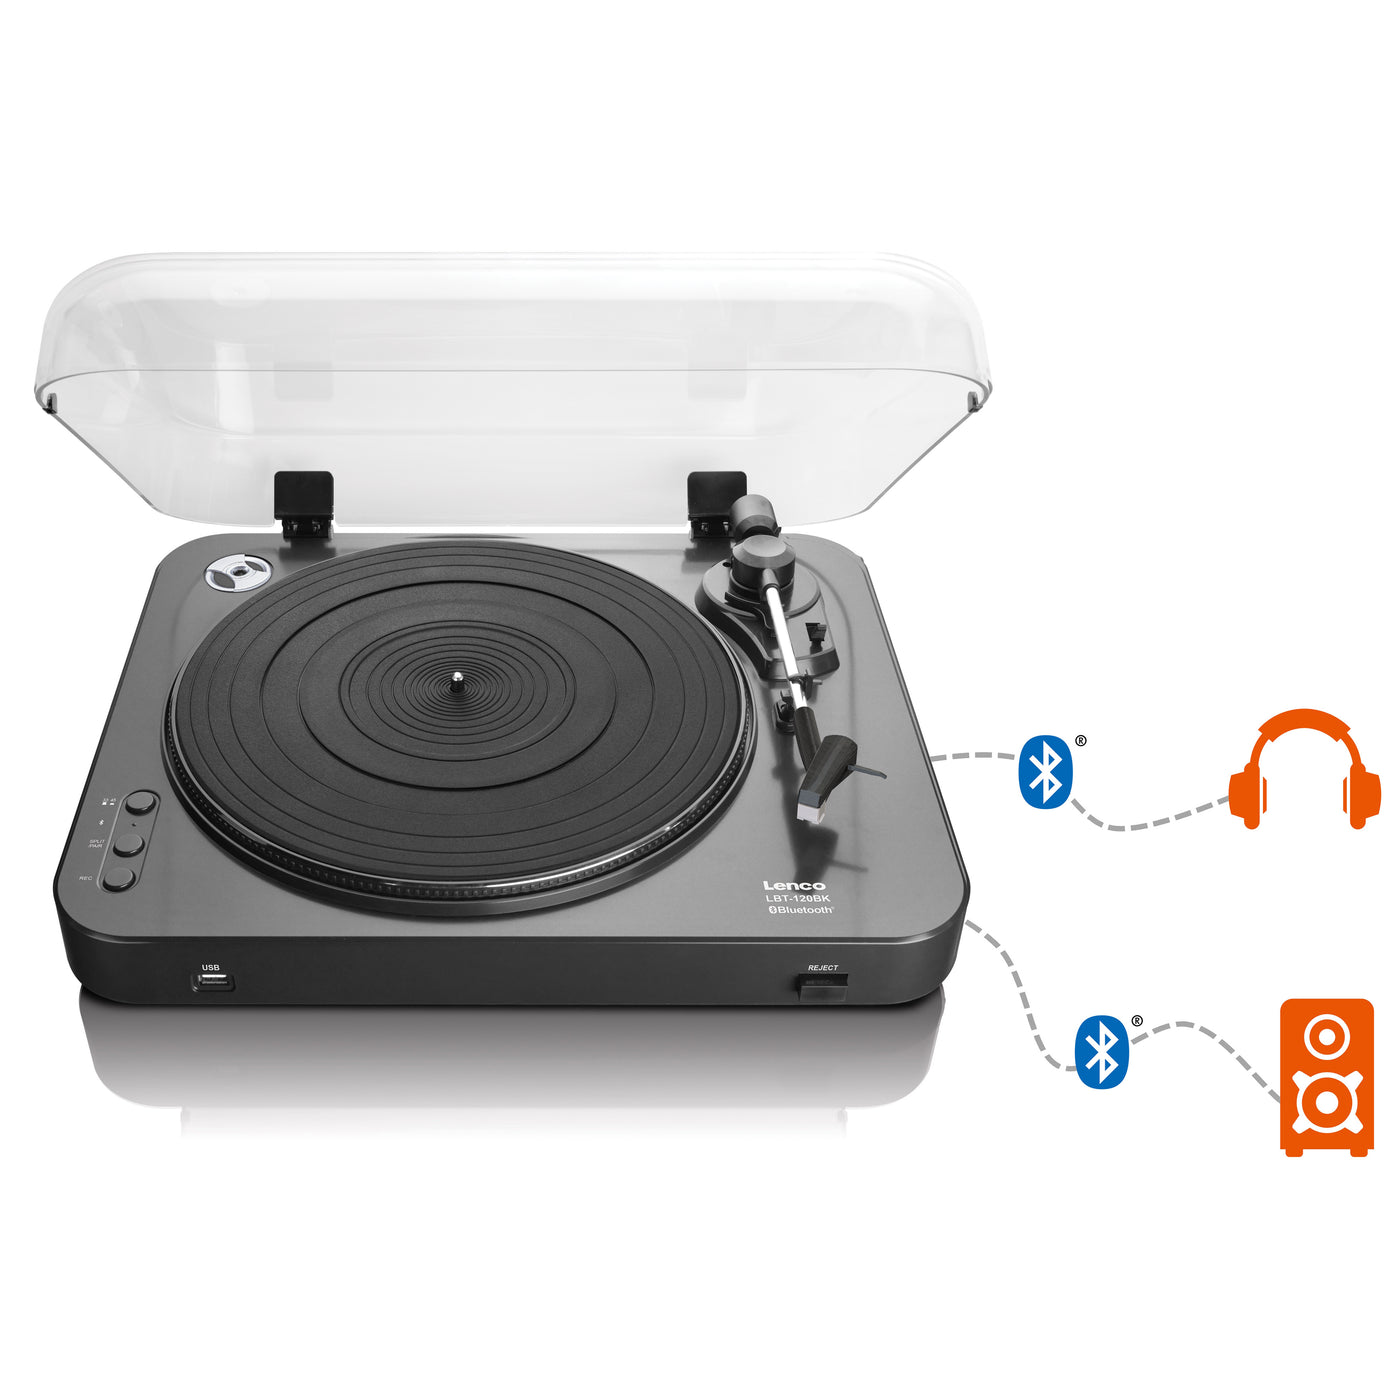 LENCO LBT-120BK - Turntable with direct encoding and Bluetooth® - Black